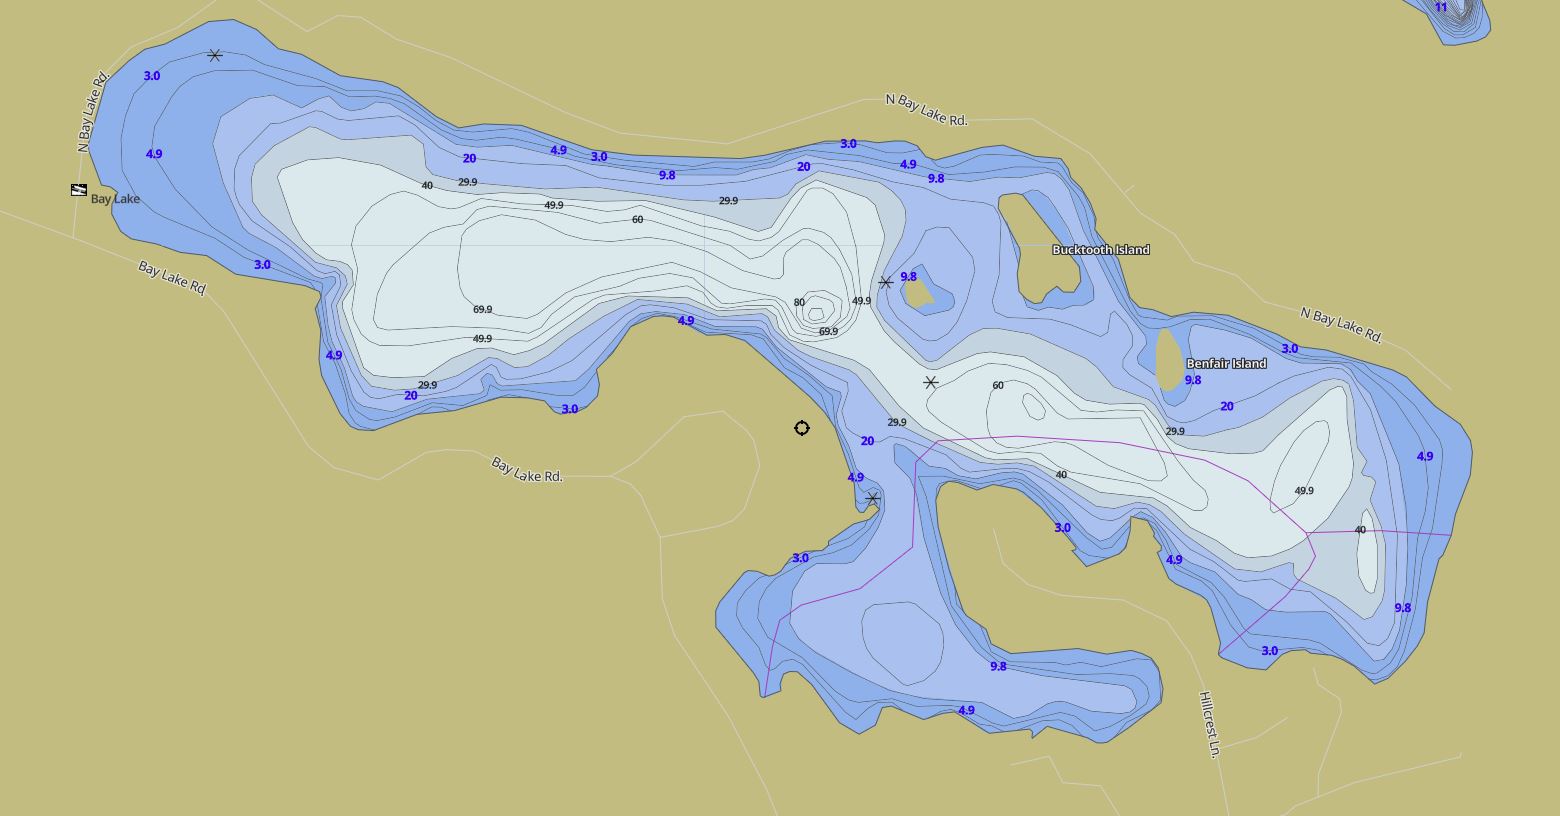 Contour Map of Bay Lake in Municipality of Perry and the District of Parry Sound